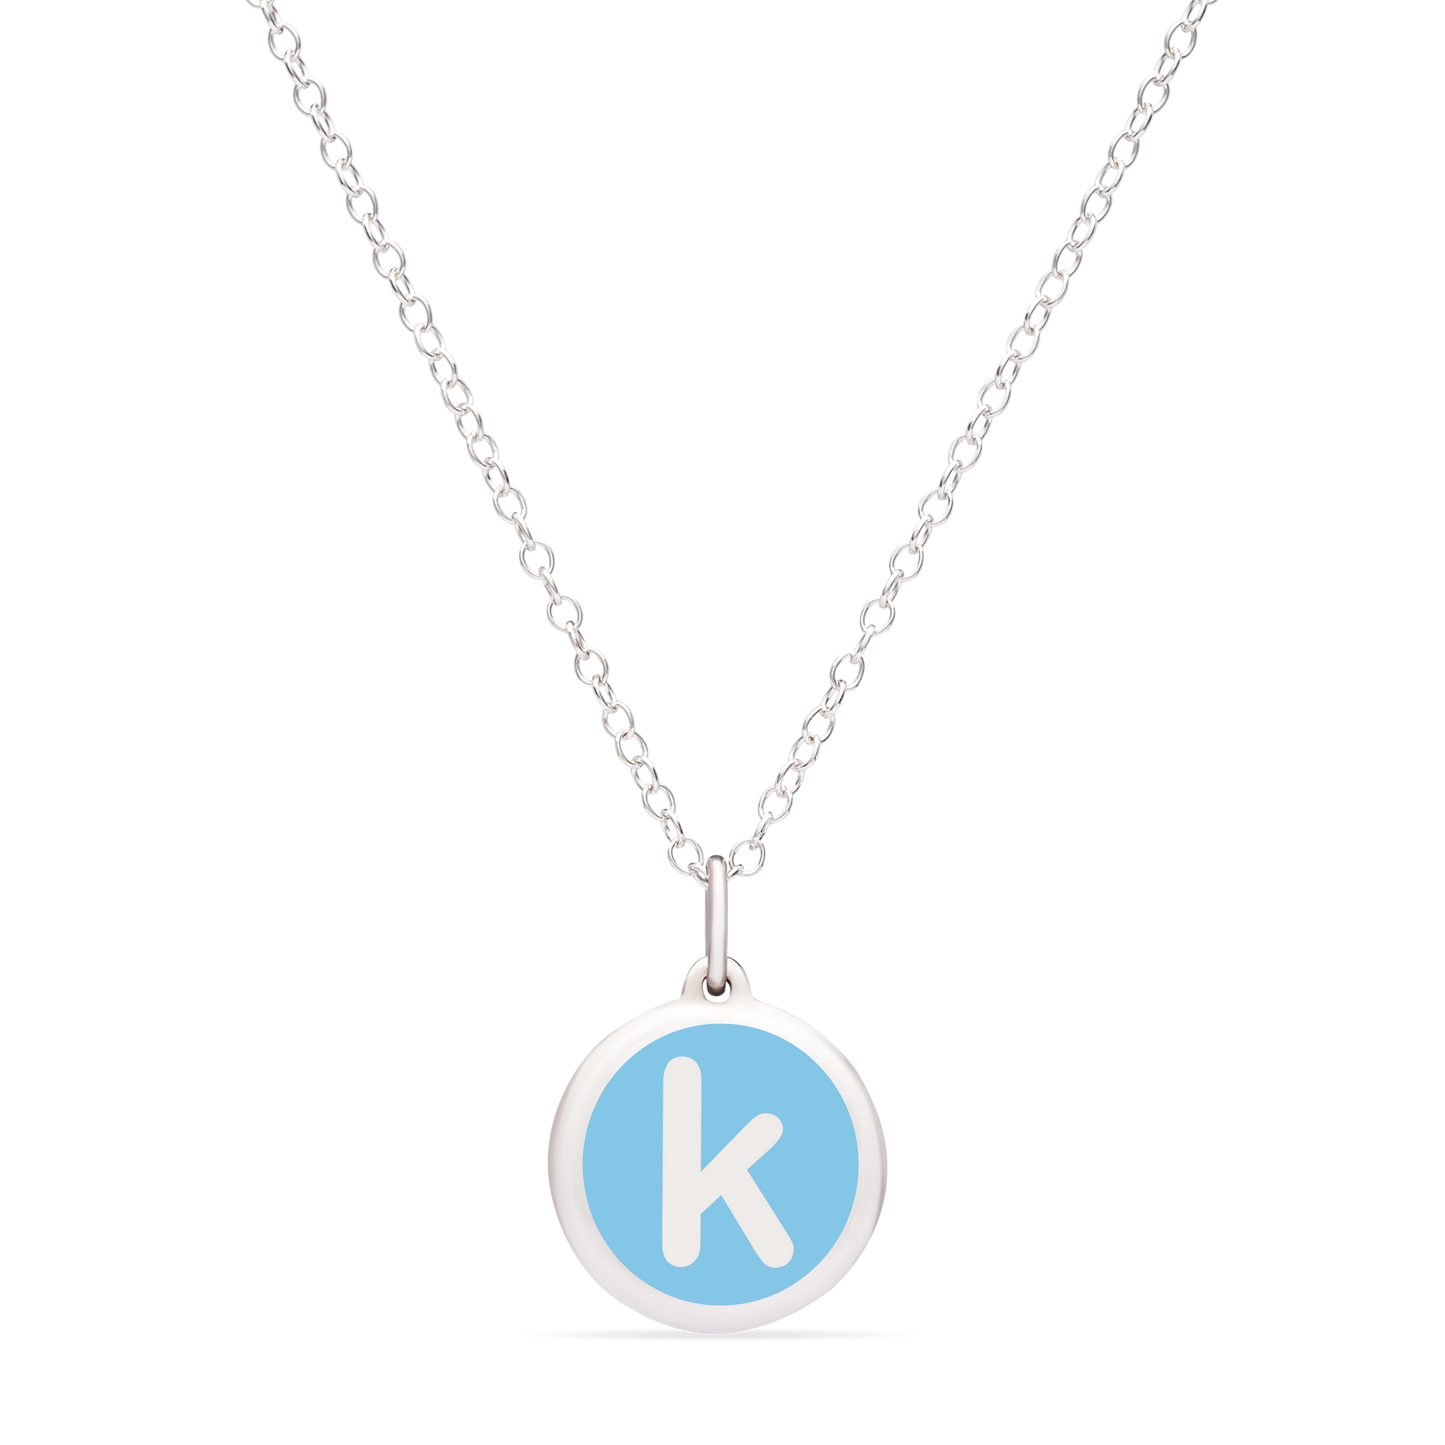 MINI INITIAL 'k' CHARM sterling silver with rhodium plate